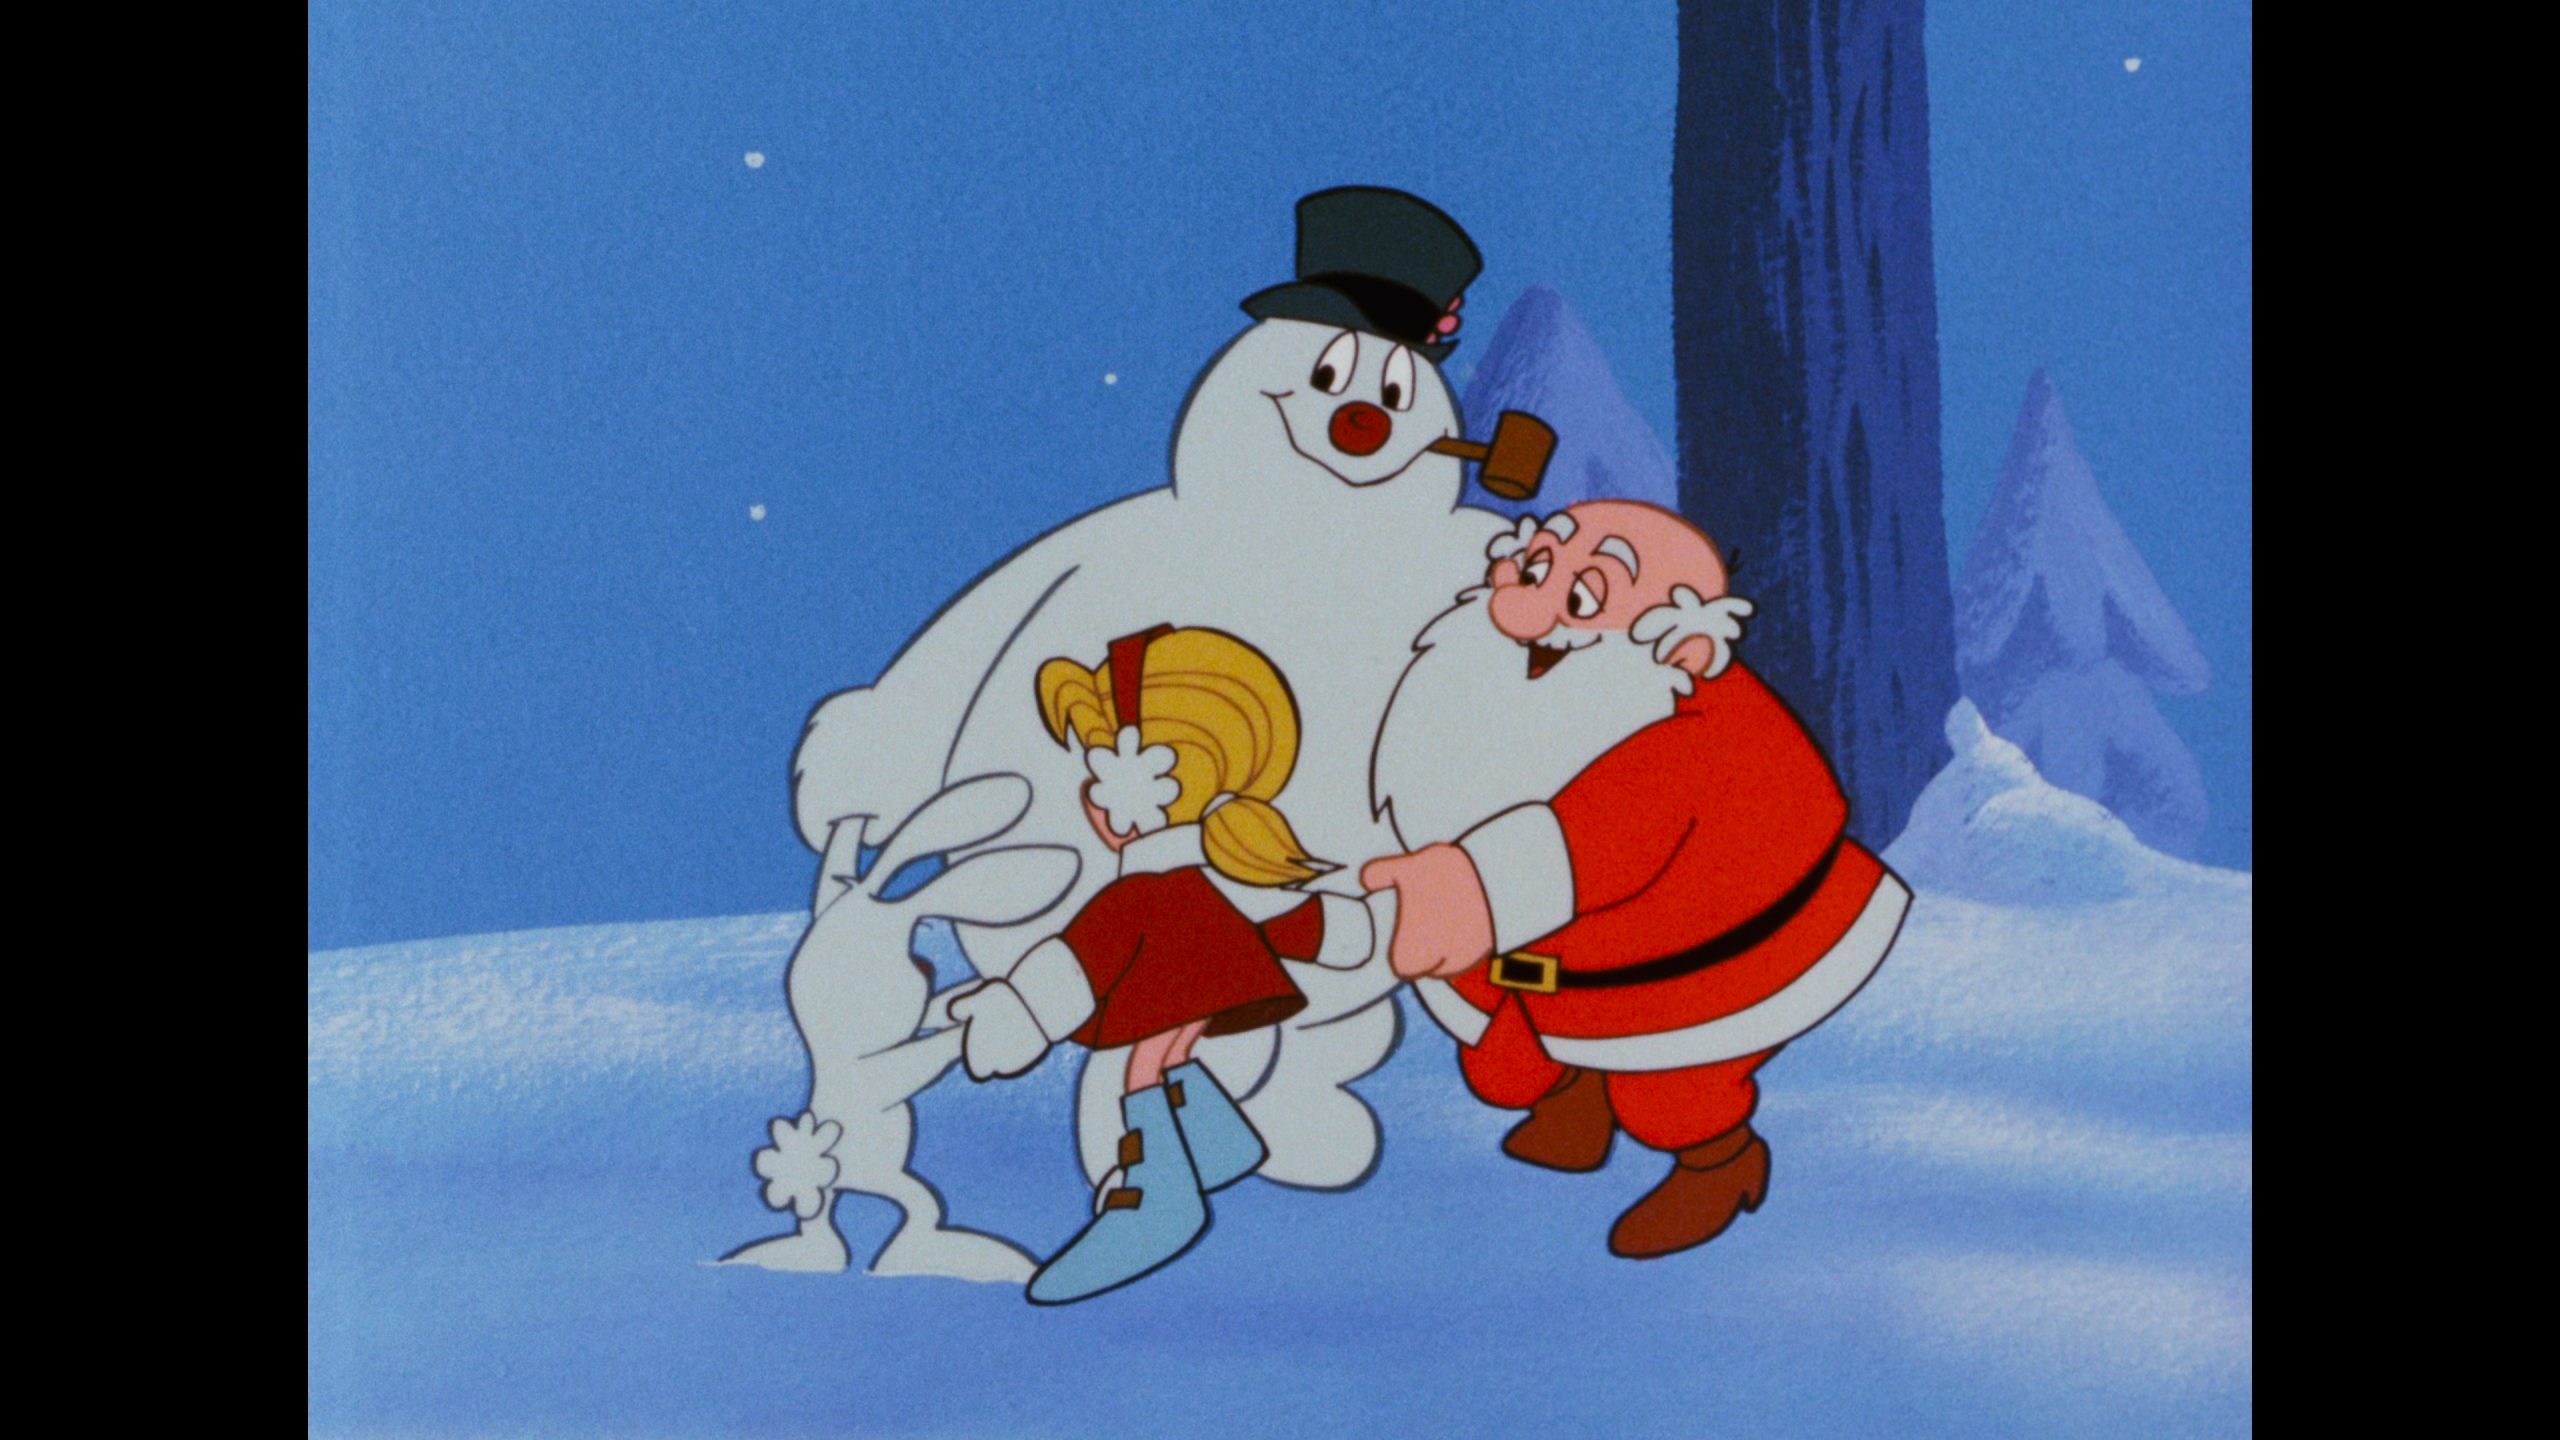 christina menges recommends Frosty The Snowman Hd